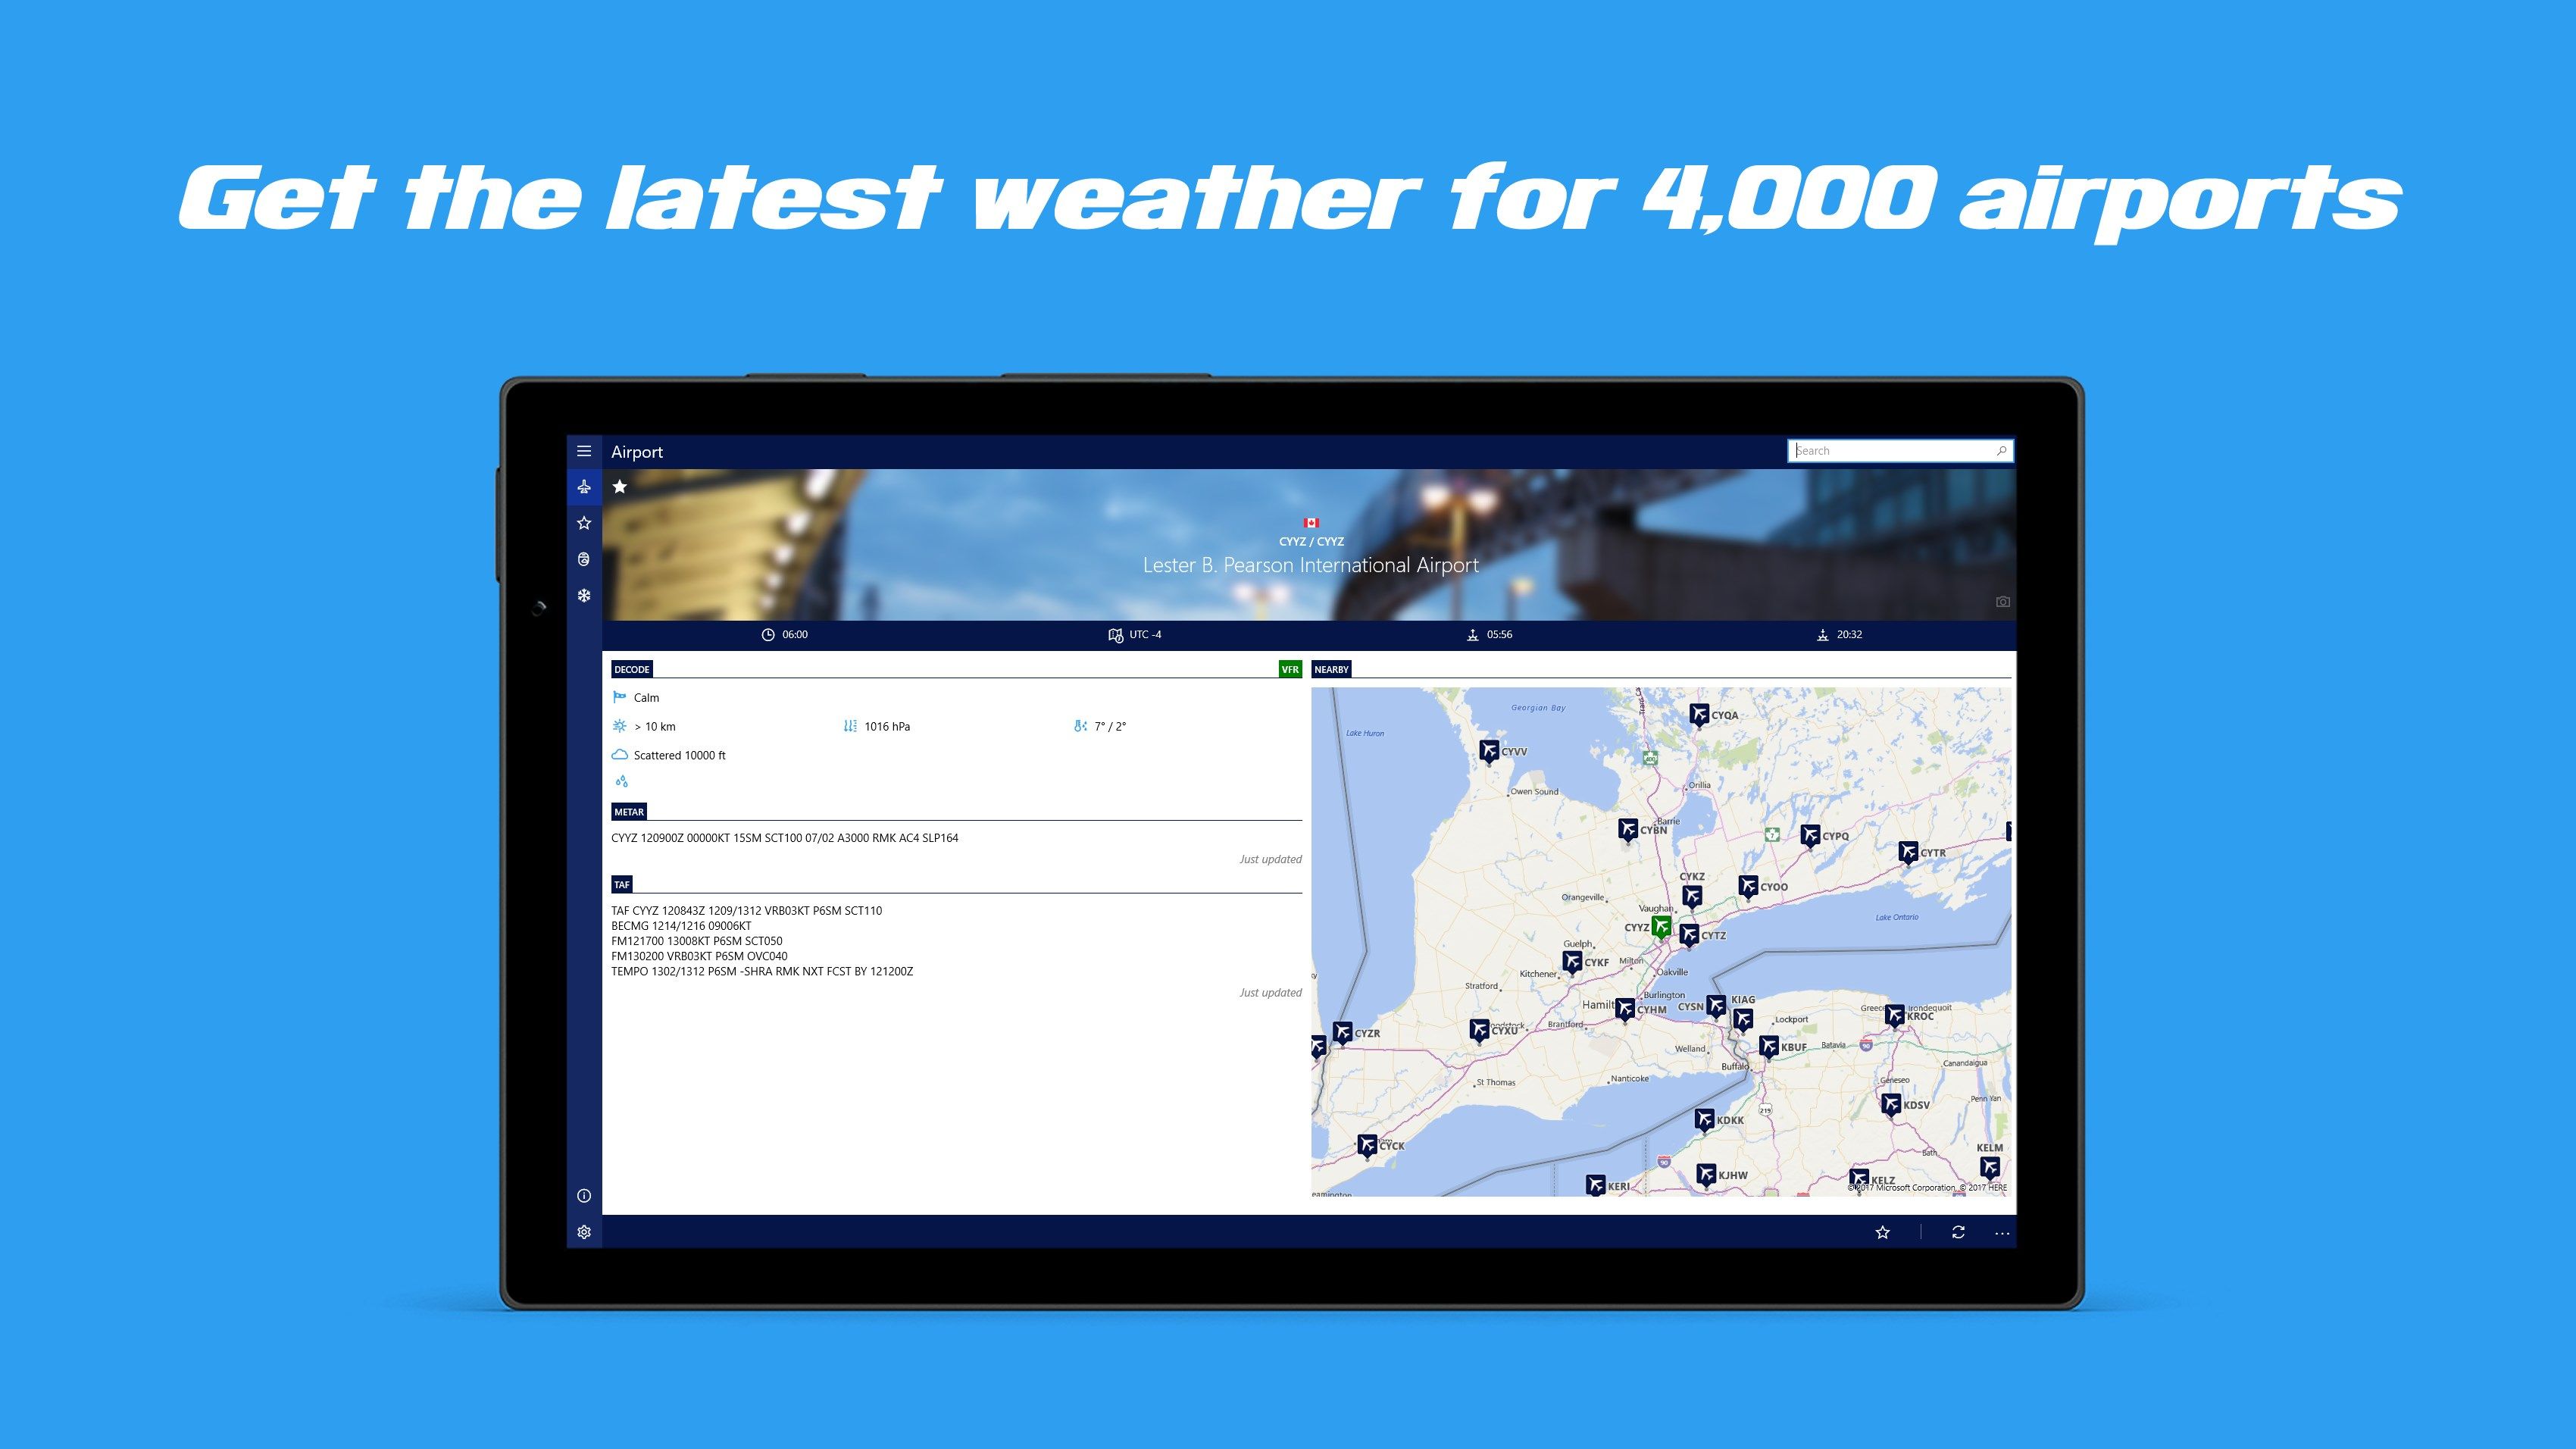 Get the latest weather for 4,000 airports